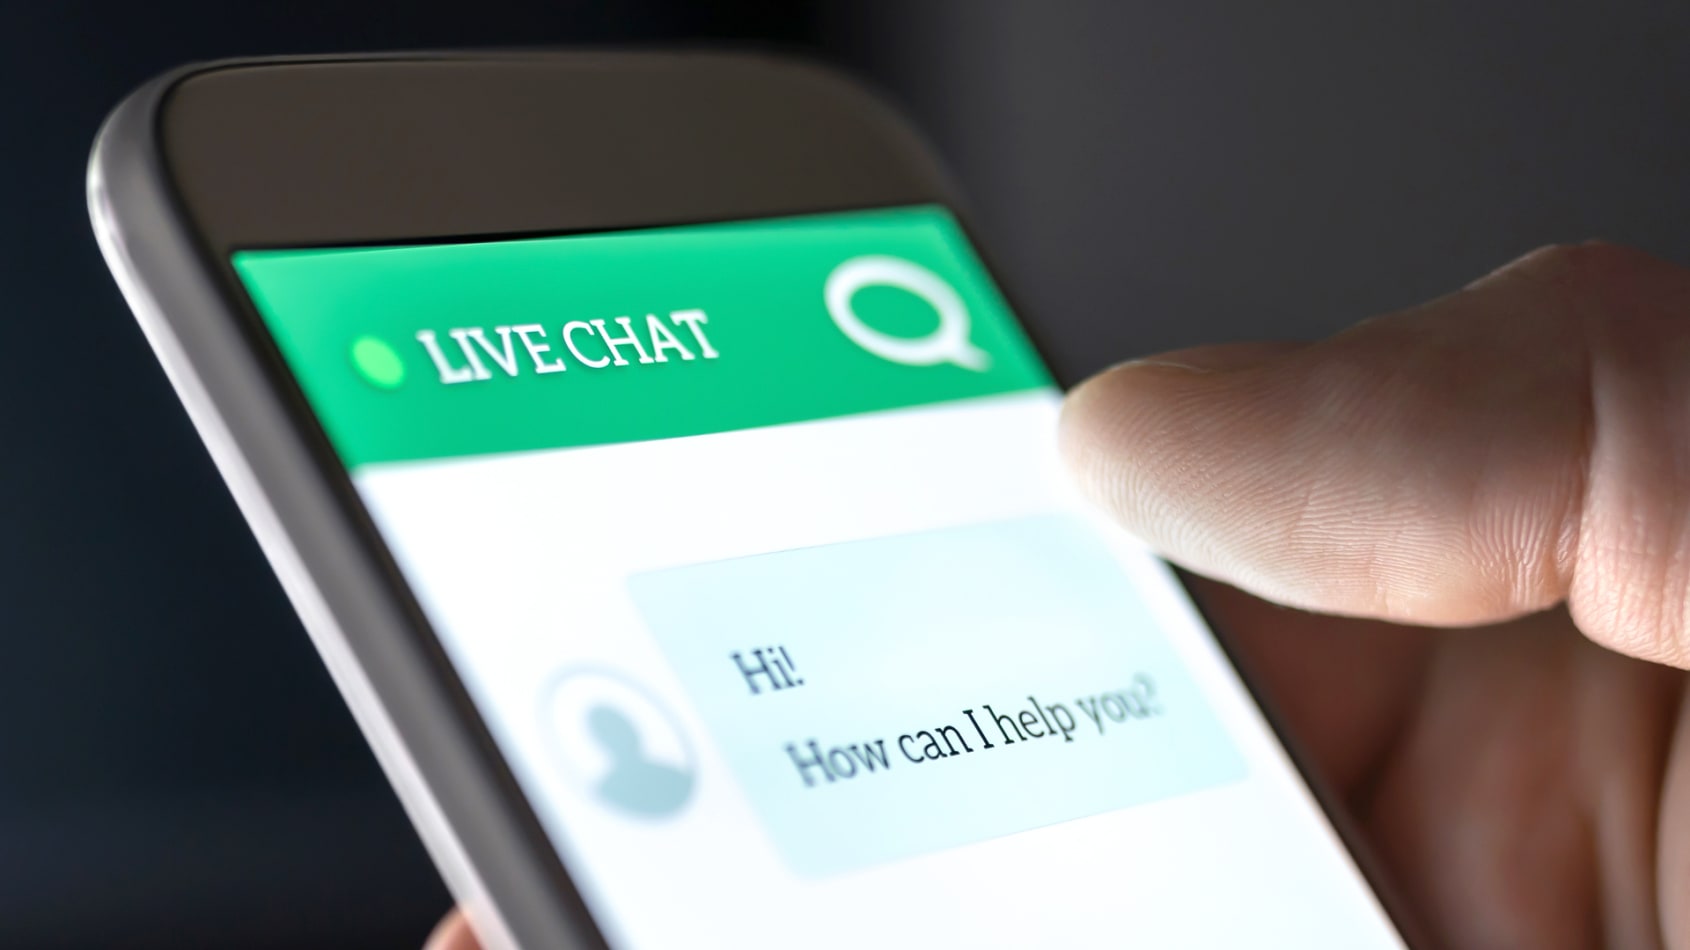 Live chat 2017